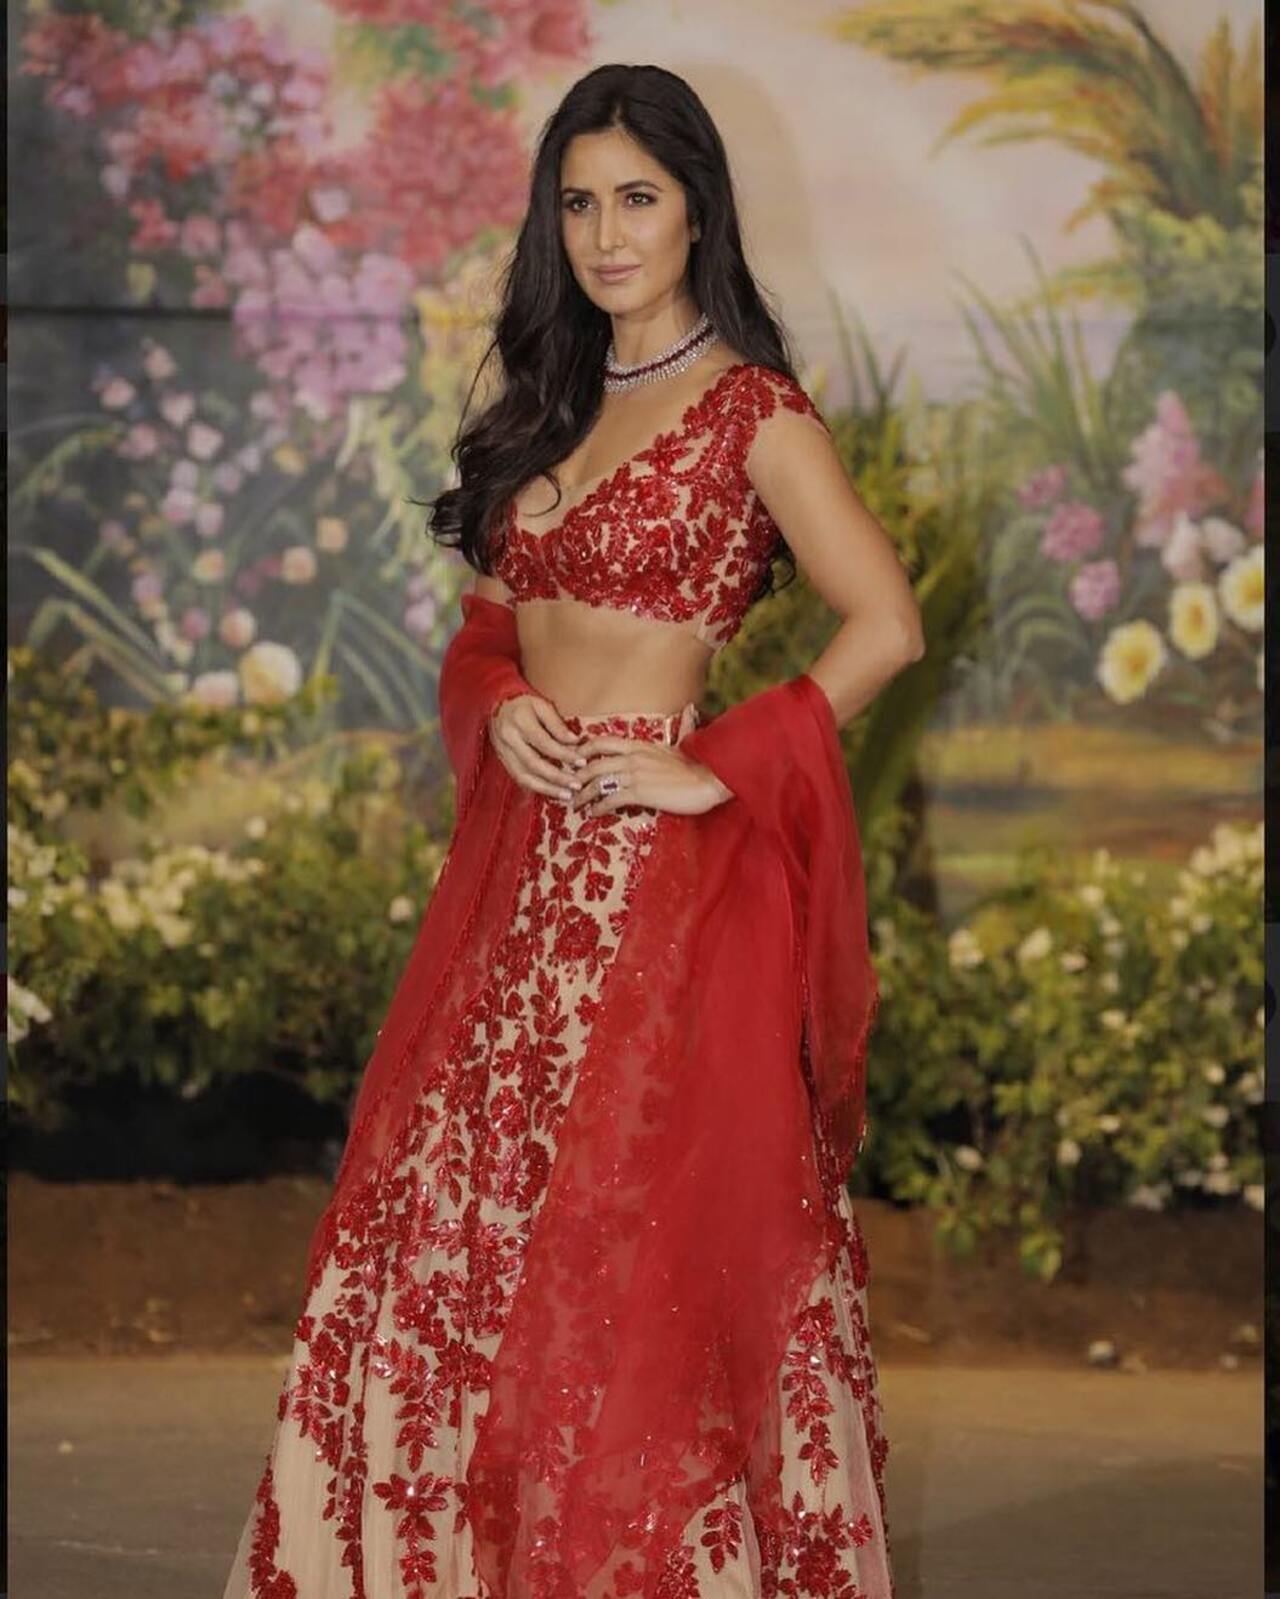 Katrina Kaif
Katrina Kaif is known for her love of fiery hues - and this outfit that she wore to Sonam Kapoor and Anand Ahuja's reception stands out from other red lehengas.  It featured a nude base with ruby-red crystal floral designs. The V-neck blouse gave an illusion of the red motifs as tattoos on her skin, while the skirt showcased red embellishments. She accessorized with a solid red dupatta, presenting a bold nude look with the appearance of the designs floating on a neutral backdrop